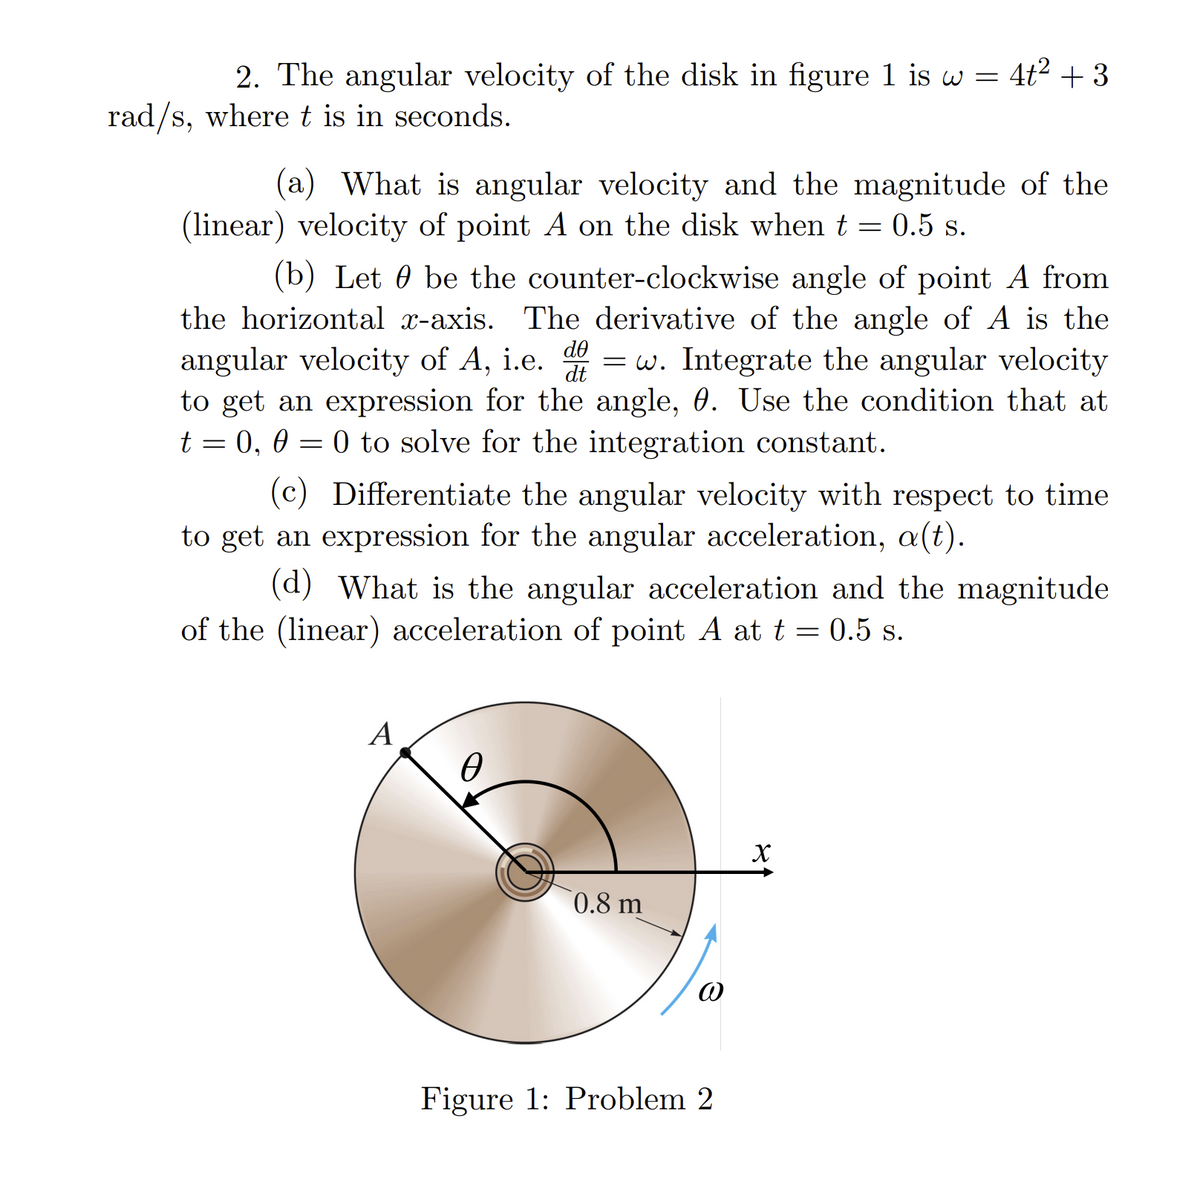 2. The angular velocity of the disk in figure 1 is w = 4t² + 3
rad/s, where t is in seconds.
(a) What is angular velocity and the magnitude of the
(linear) velocity of point A on the disk when t = 0.5 s.
(b) Let be the counter-clockwise angle of point A from
the horizontal x-axis. The derivative of the angle of A is the
angular velocity of A, i.e. =w. Integrate the angular velocity
to get an expression for the angle, 0. Use the condition that at
t = 0, 0 = 0 to solve for the integration constant.
dᎾ
dt
(c) Differentiate the angular velocity with respect to time
to get an expression for the angular acceleration, a(t).
(d) What is the angular acceleration and the magnitude
of the (linear) acceleration of point A at t = 0.5 s.
A
Ө
0.8 m
@
Figure 1: Problem 2
X